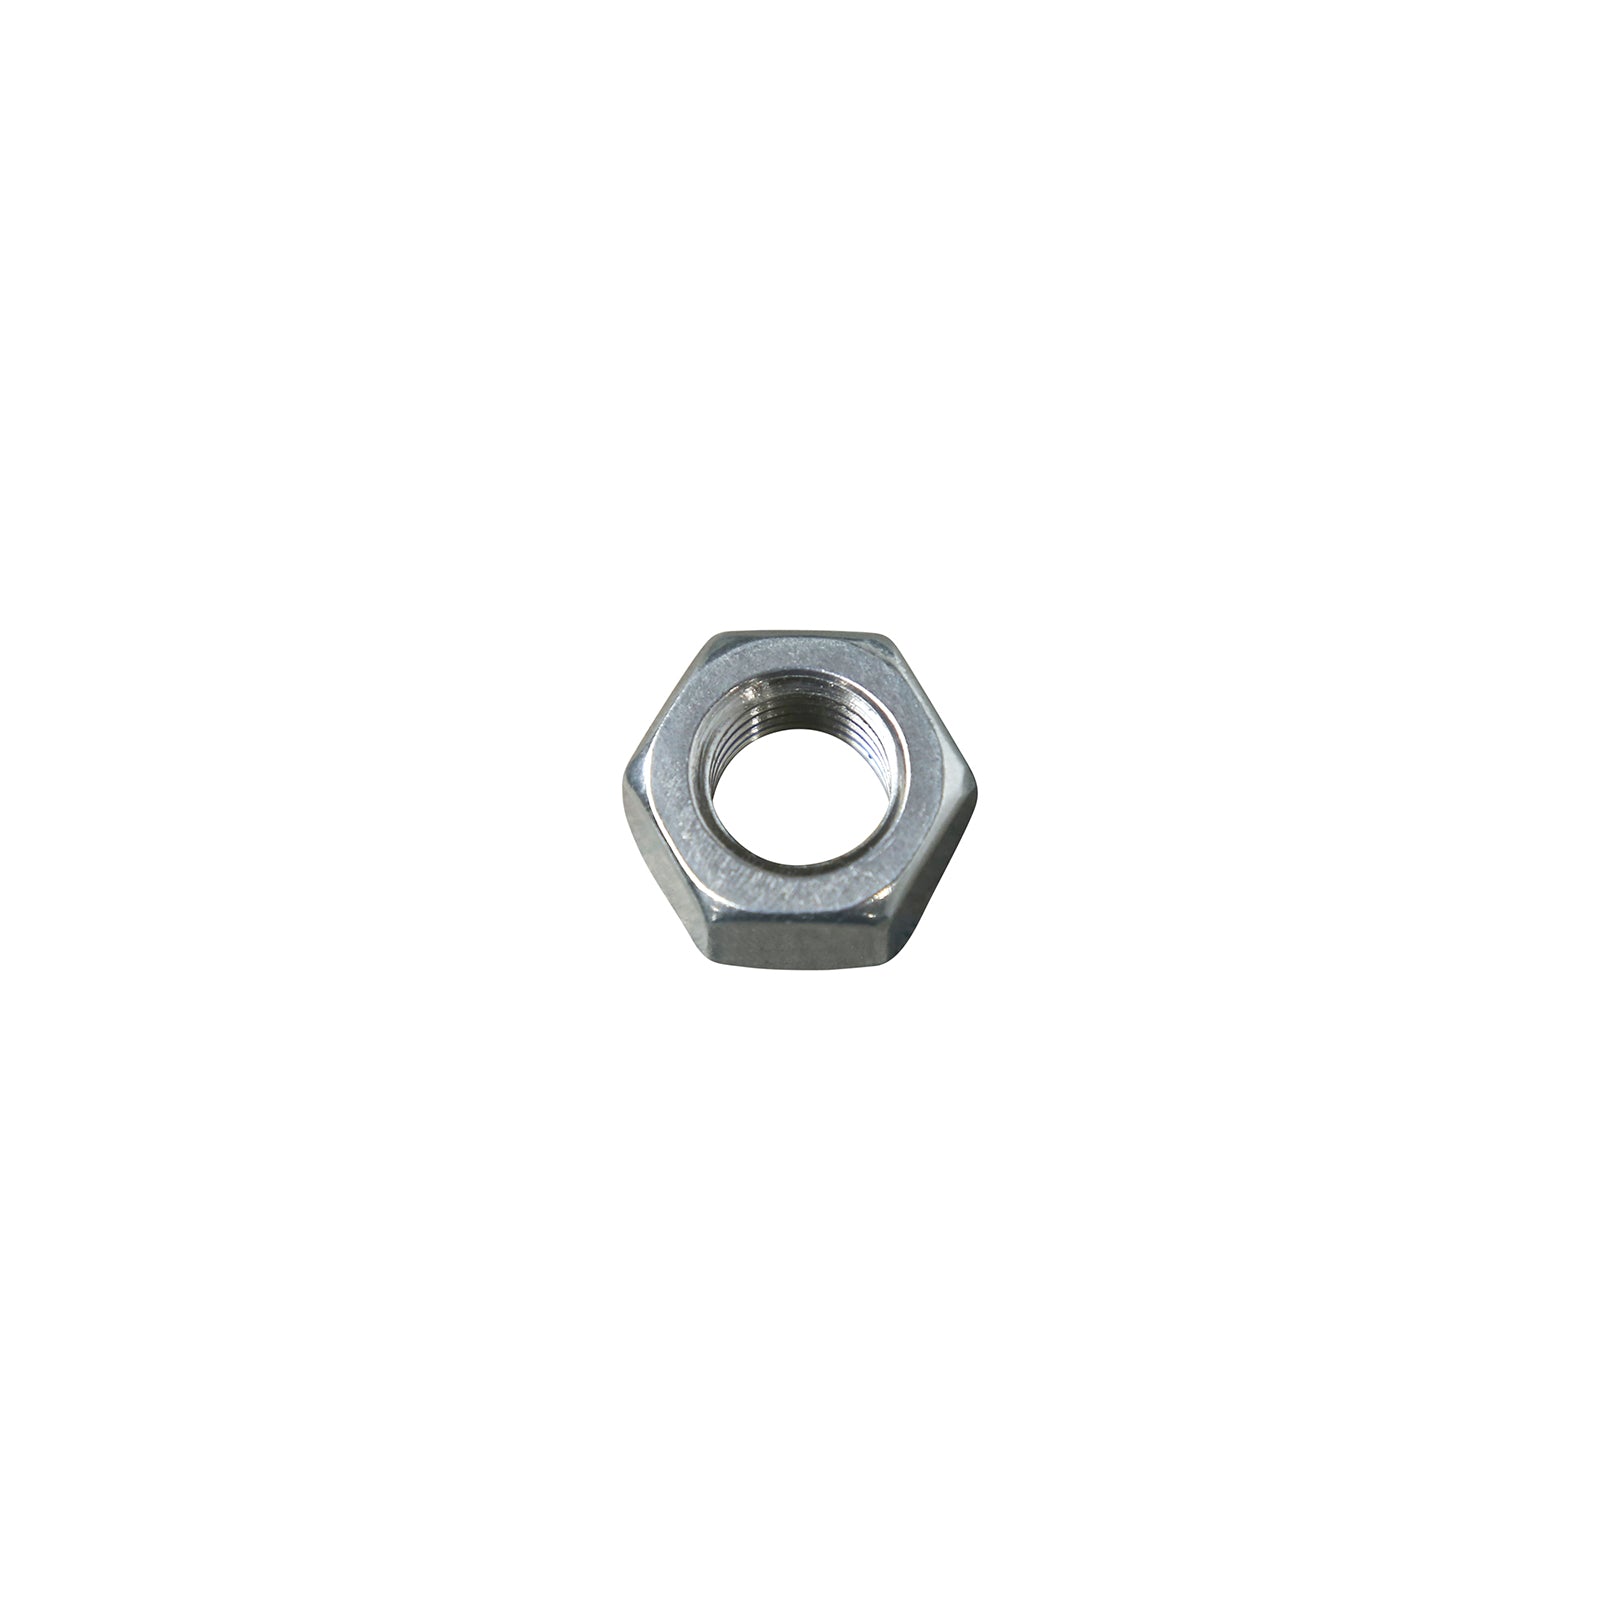 1/2-13 Hex Nuts, Stainless Steel 304 Hex Nut, Bright Finish